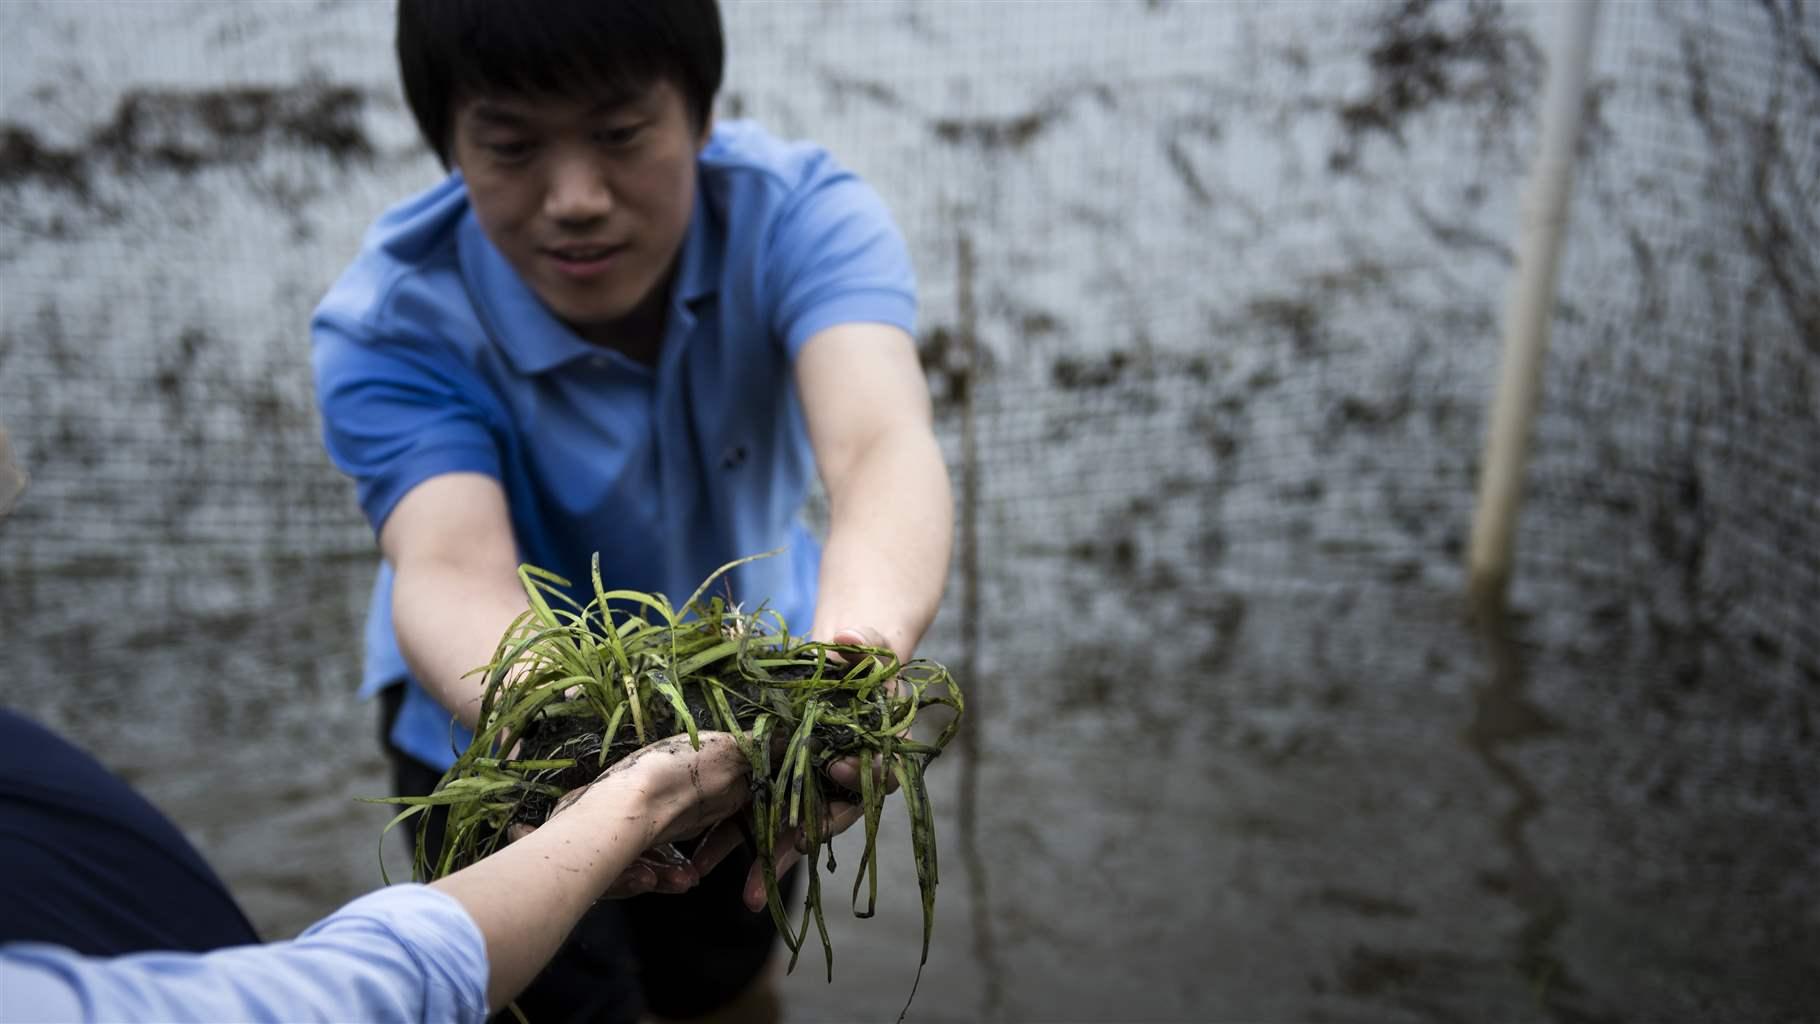 A staff member from the Chinese embassy helps plant seagrass in the Potomac River, a tributary of the Chesapeake Bay, at Mason Neck State Park on June 5, 2017, in Lorton, Virginia.